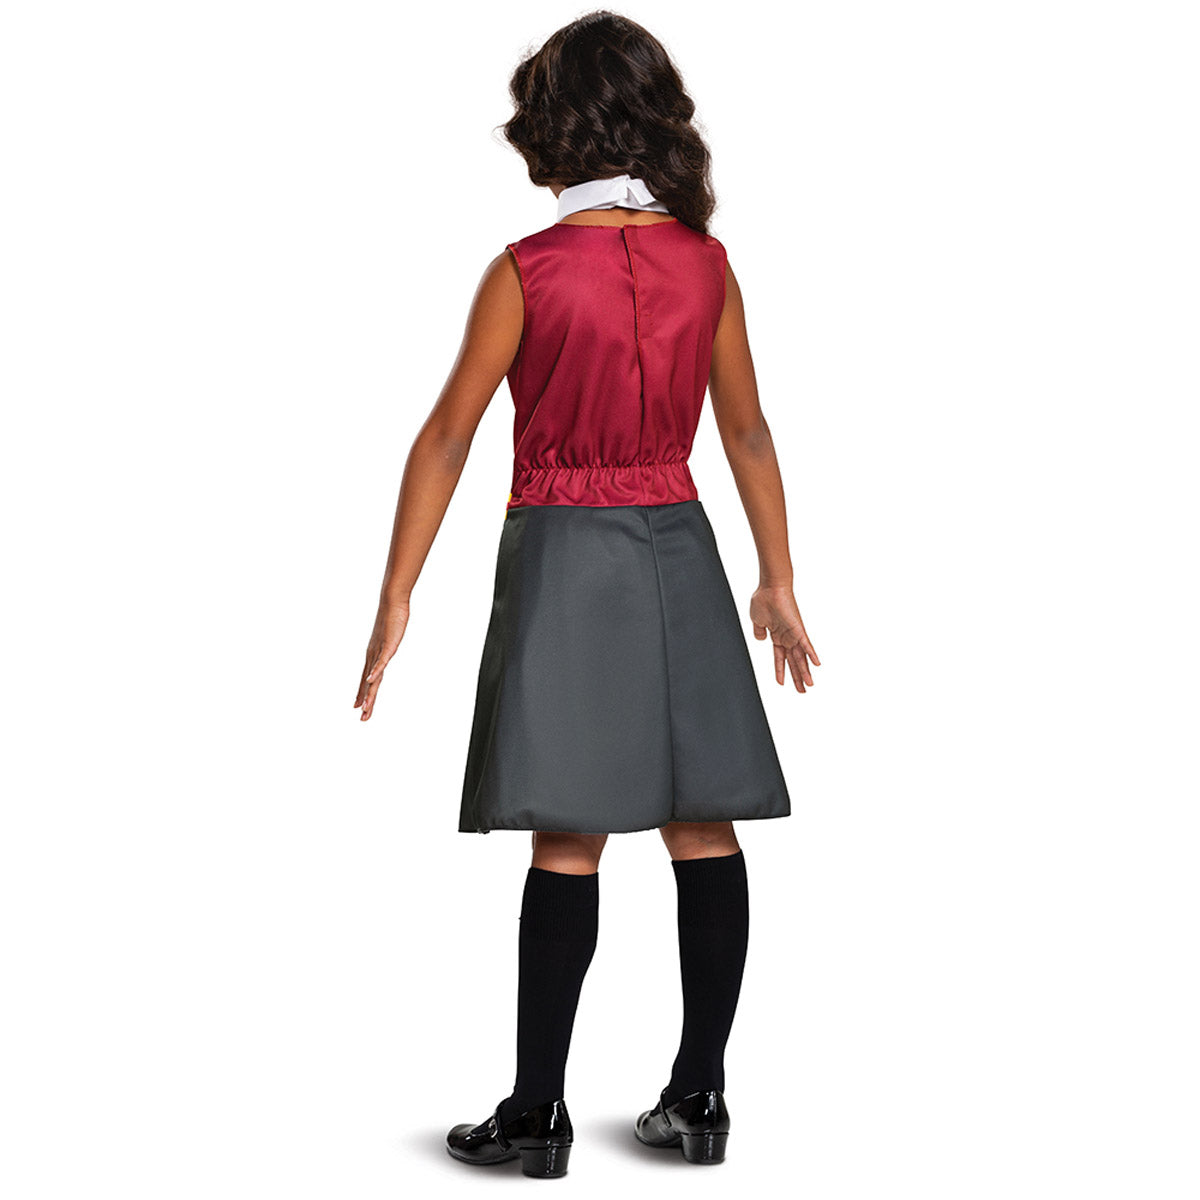 Gryffindor Dress Classic Disguise 108029